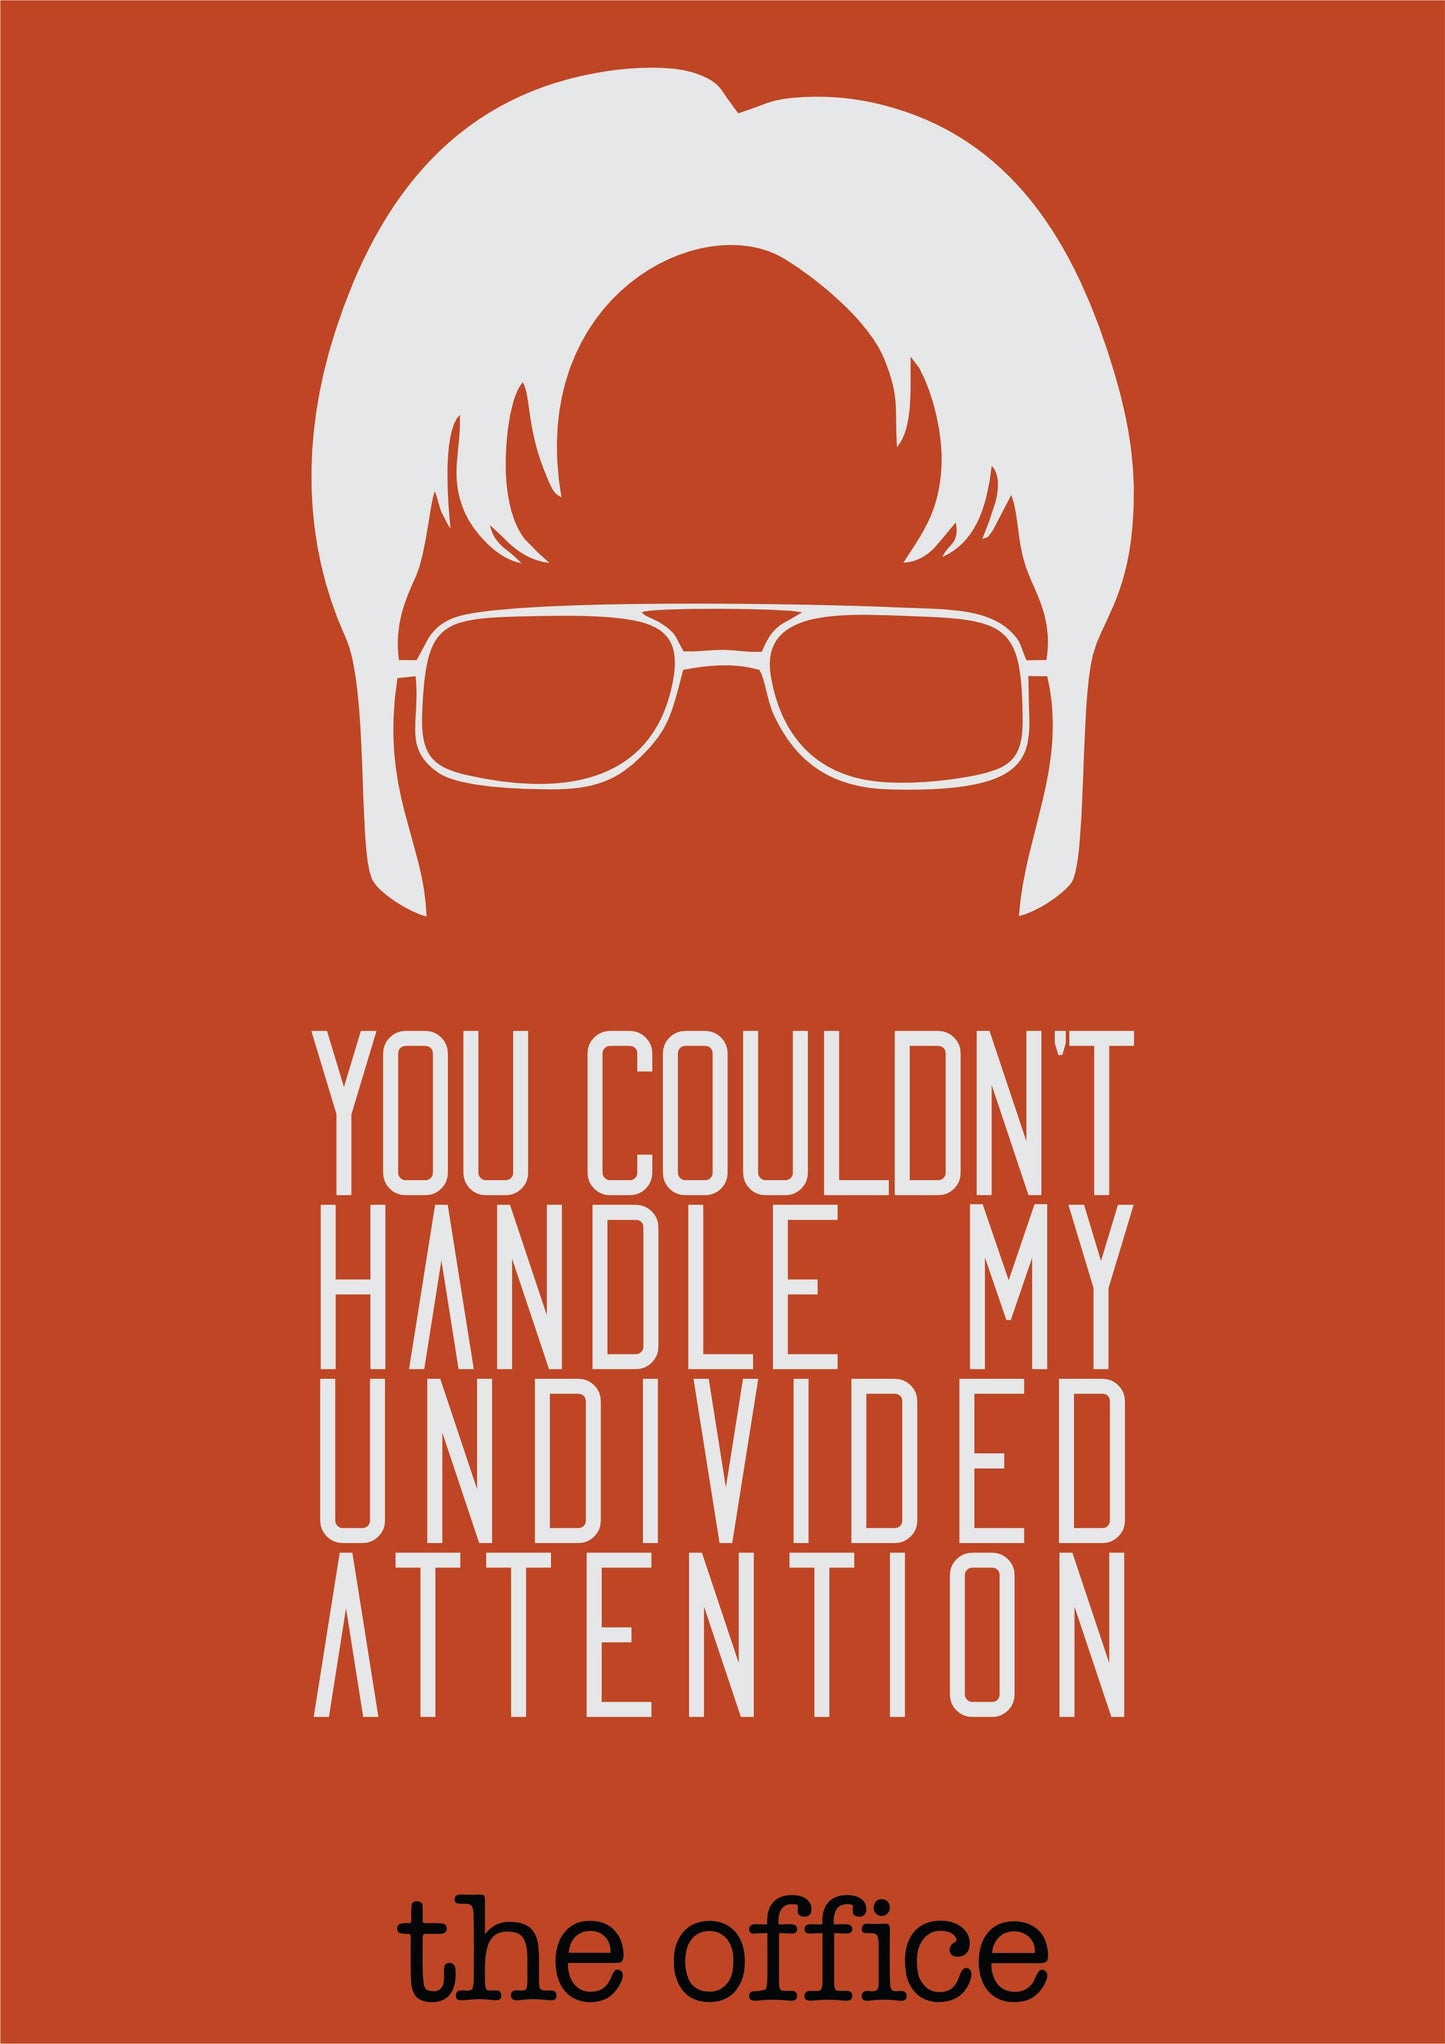 The Office - You couldn't handle my undivided attention